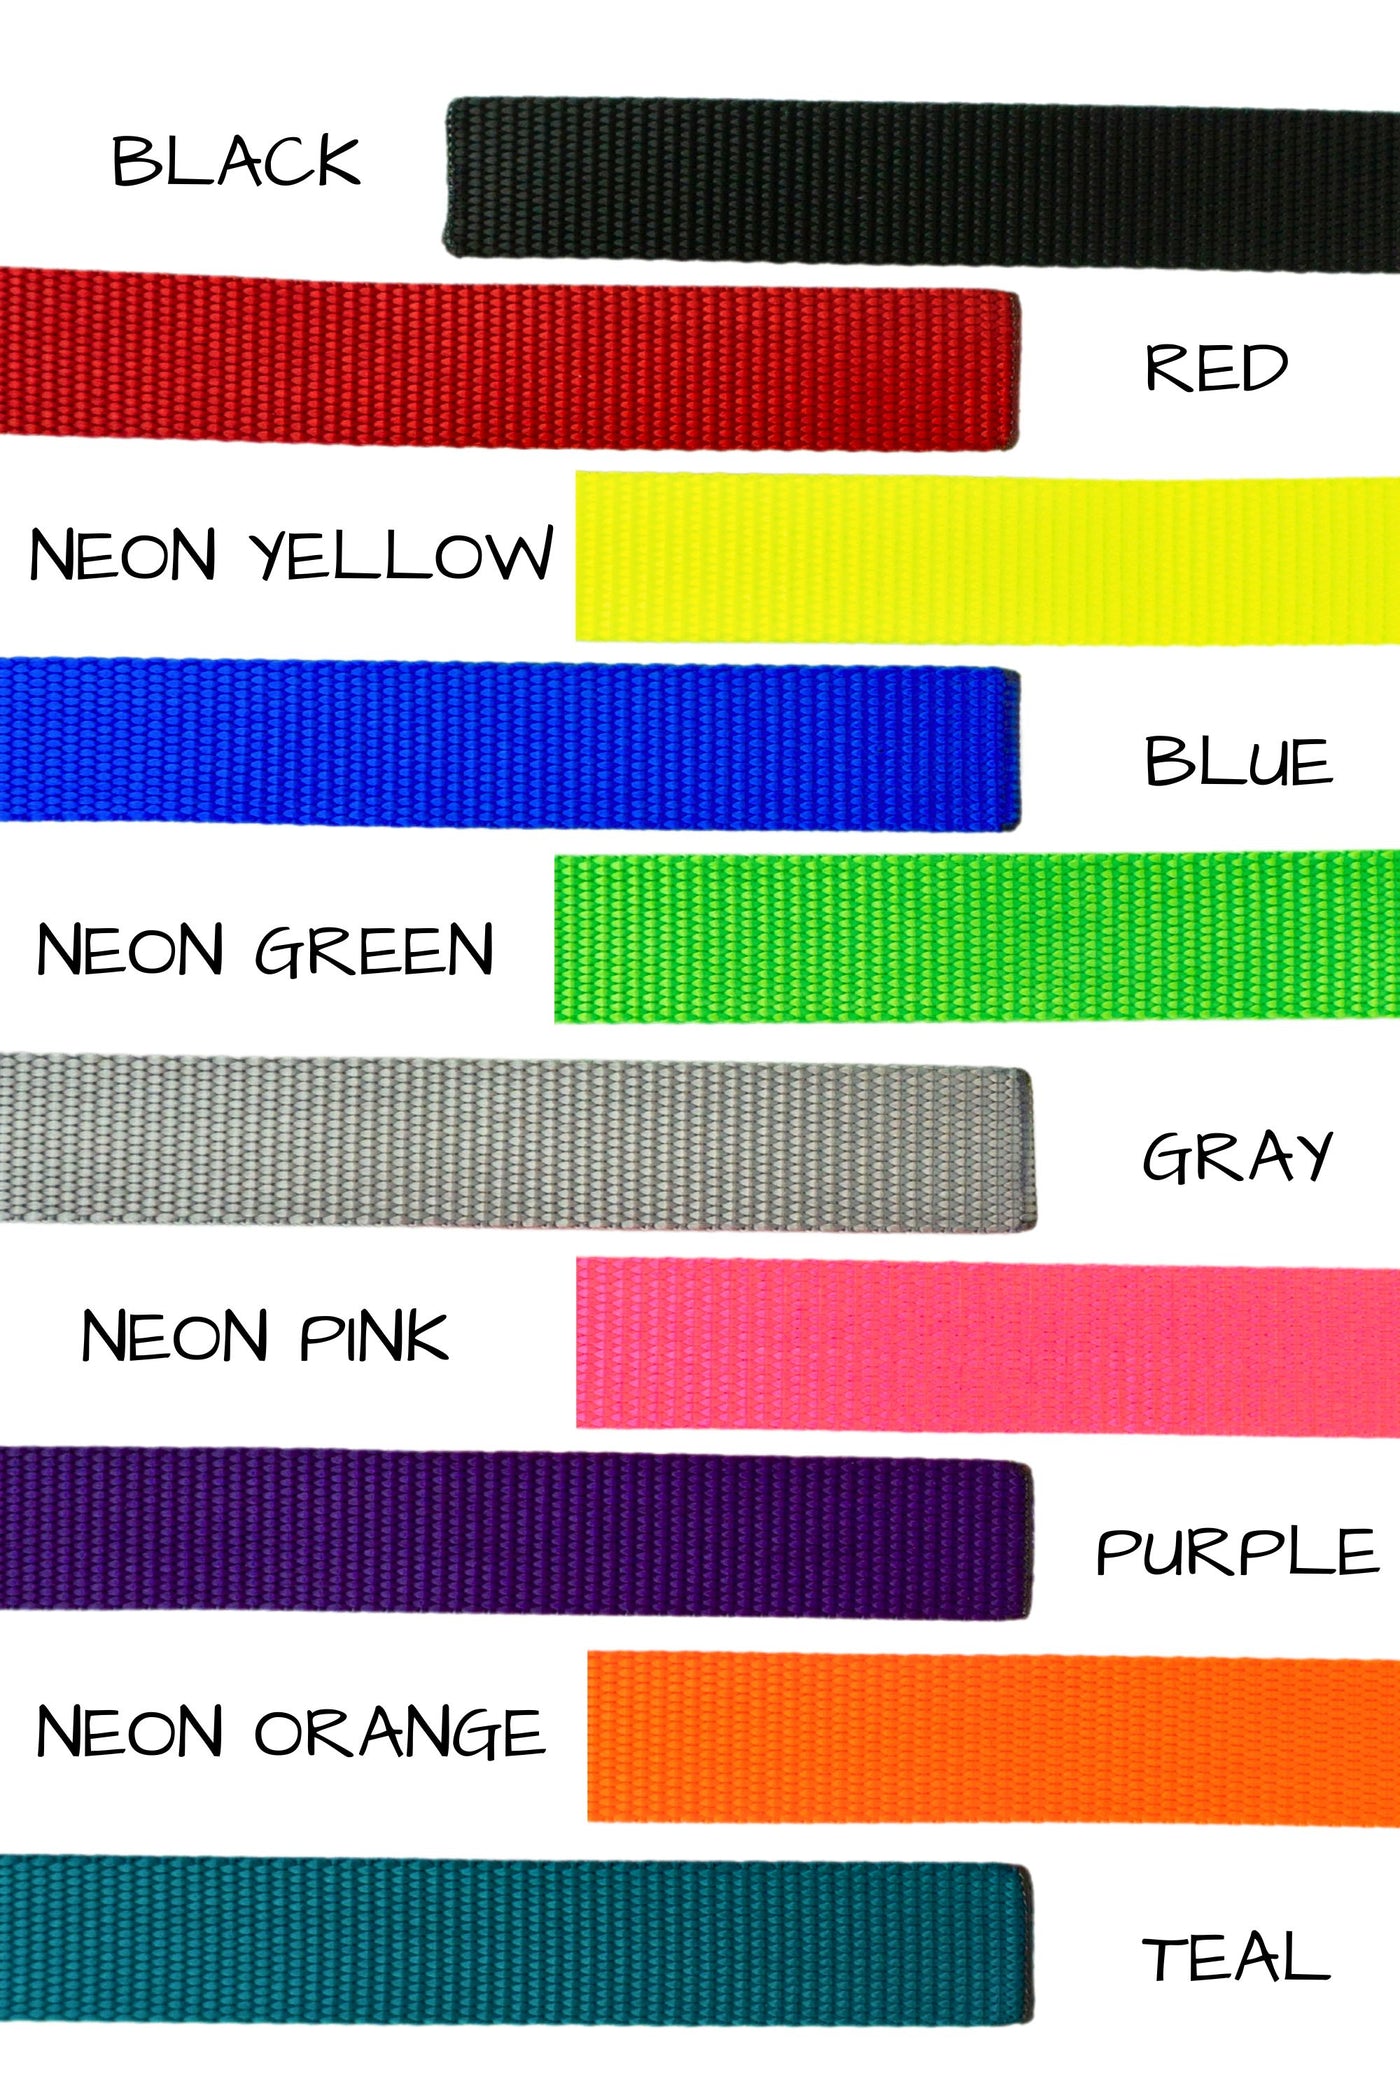 Training grab tabs are available in ten colors of heavy duty nylon webbing, including black, red, neon yellow, blue, neon green, gray, neon pink, purple, neon orange, or teal.